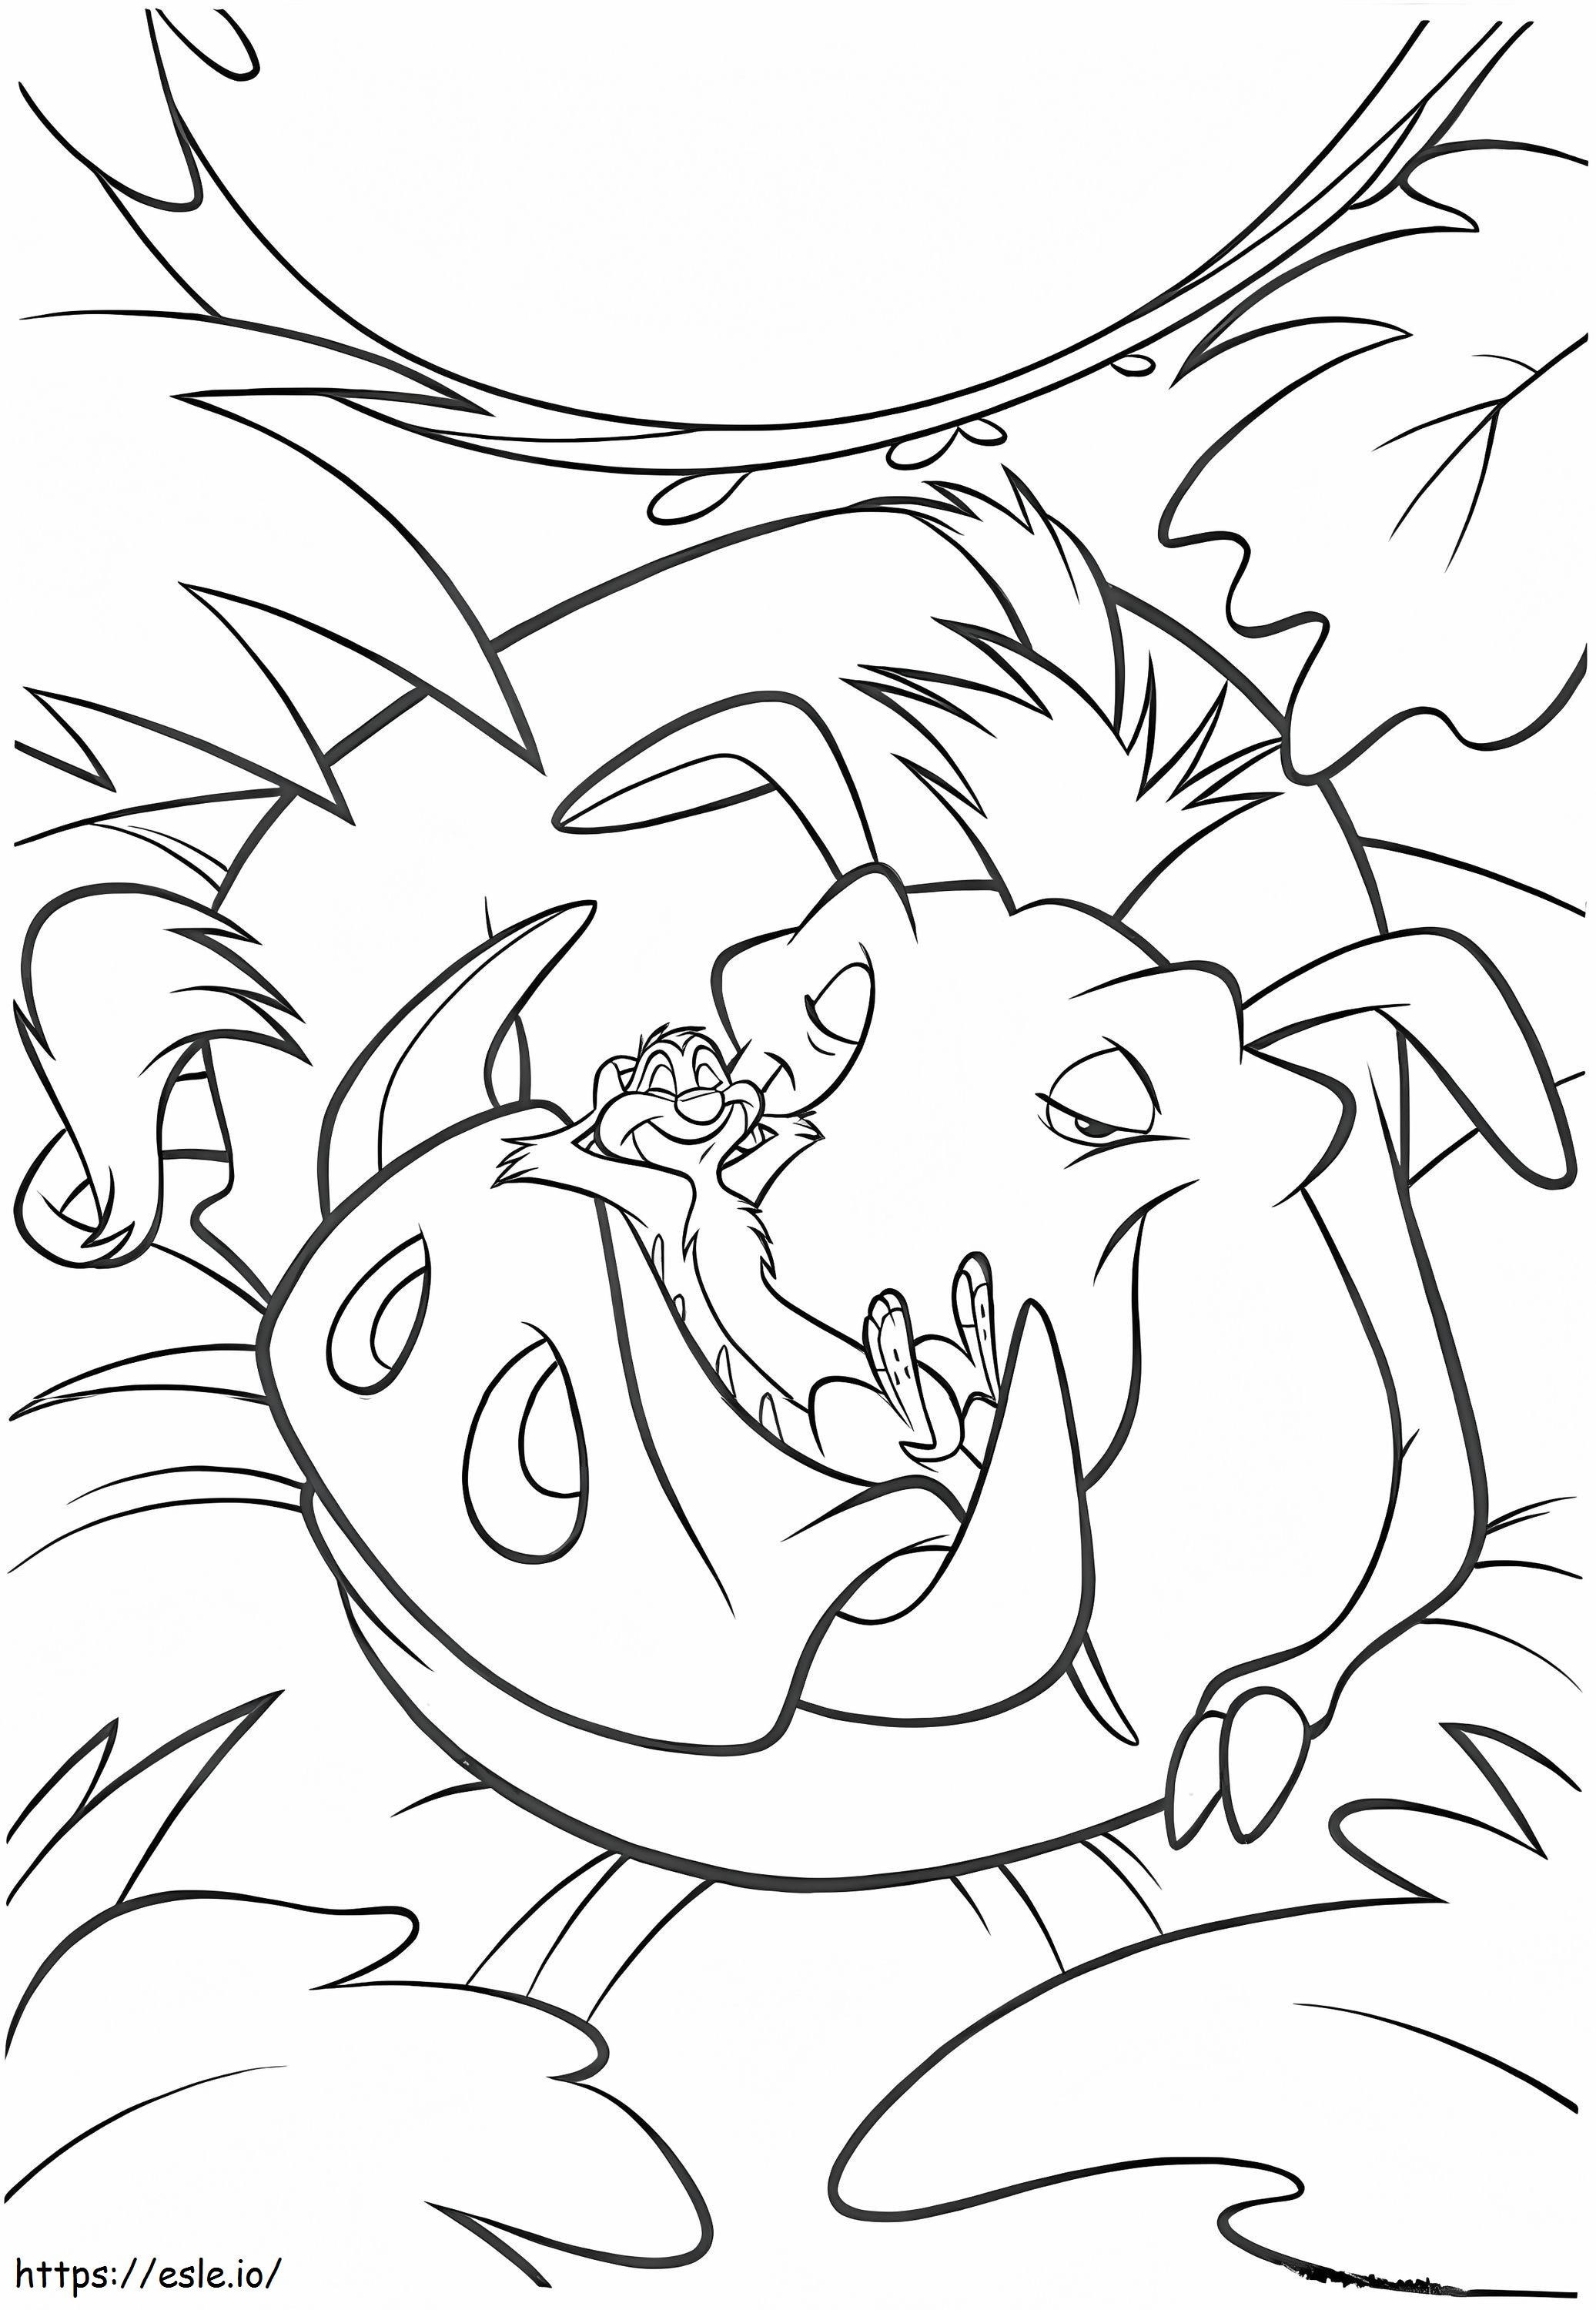 Pumbaa And Timon Sleeping A4 coloring page